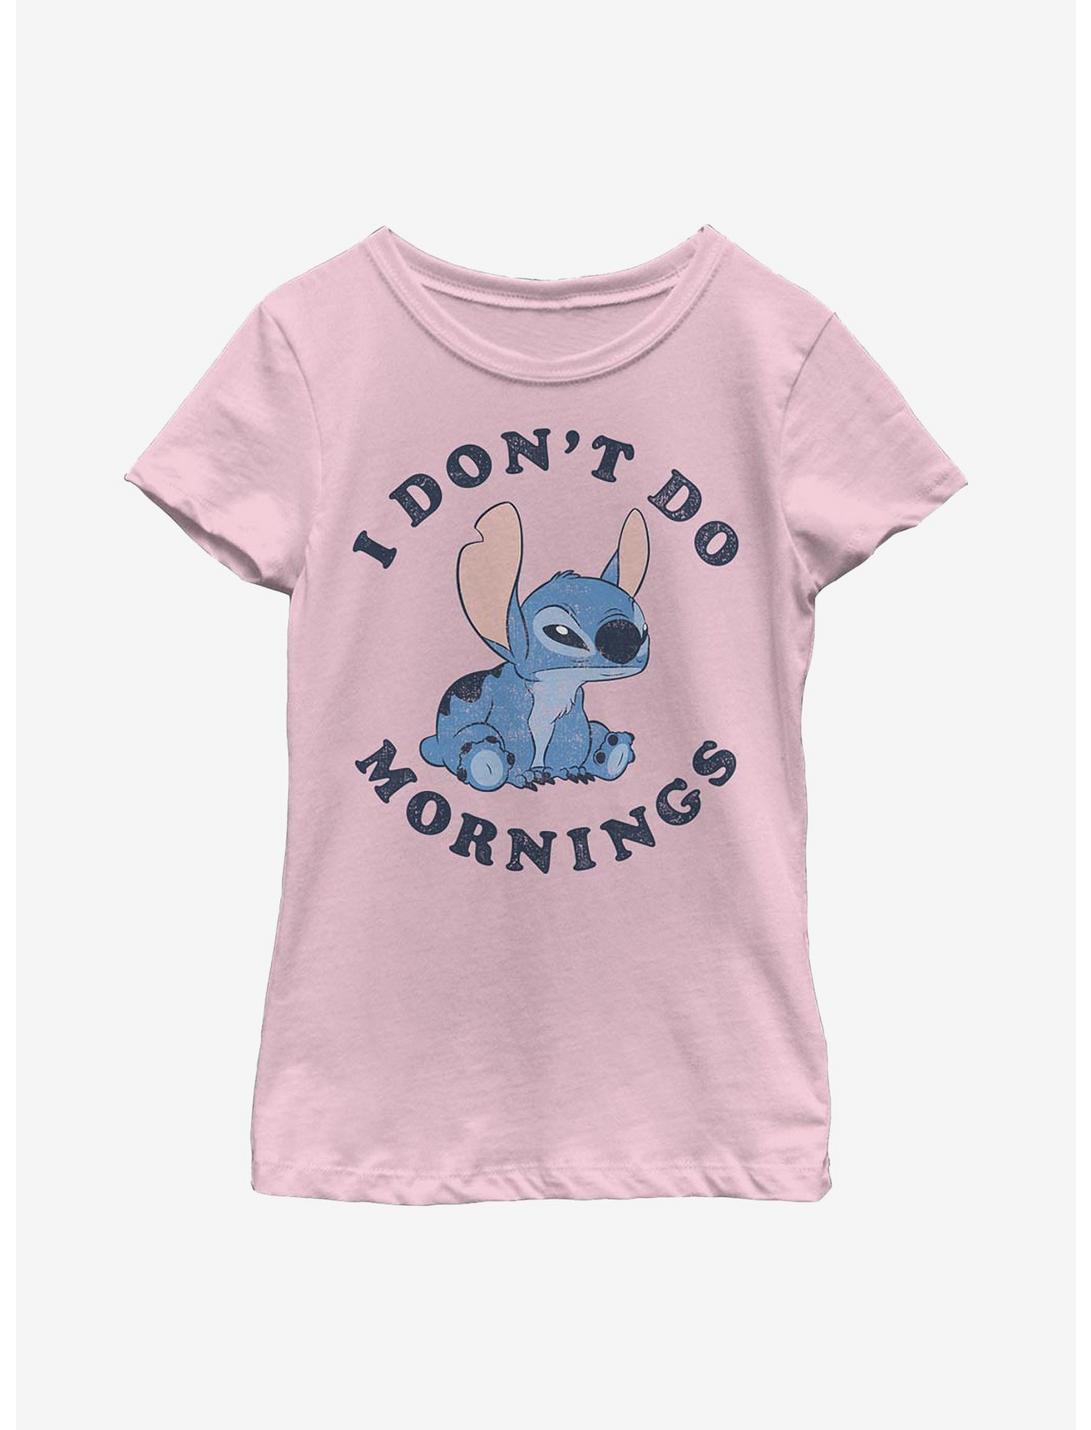 Disney Lilo And Stitch Mornings Youth Girls T-Shirt, PINK, hi-res